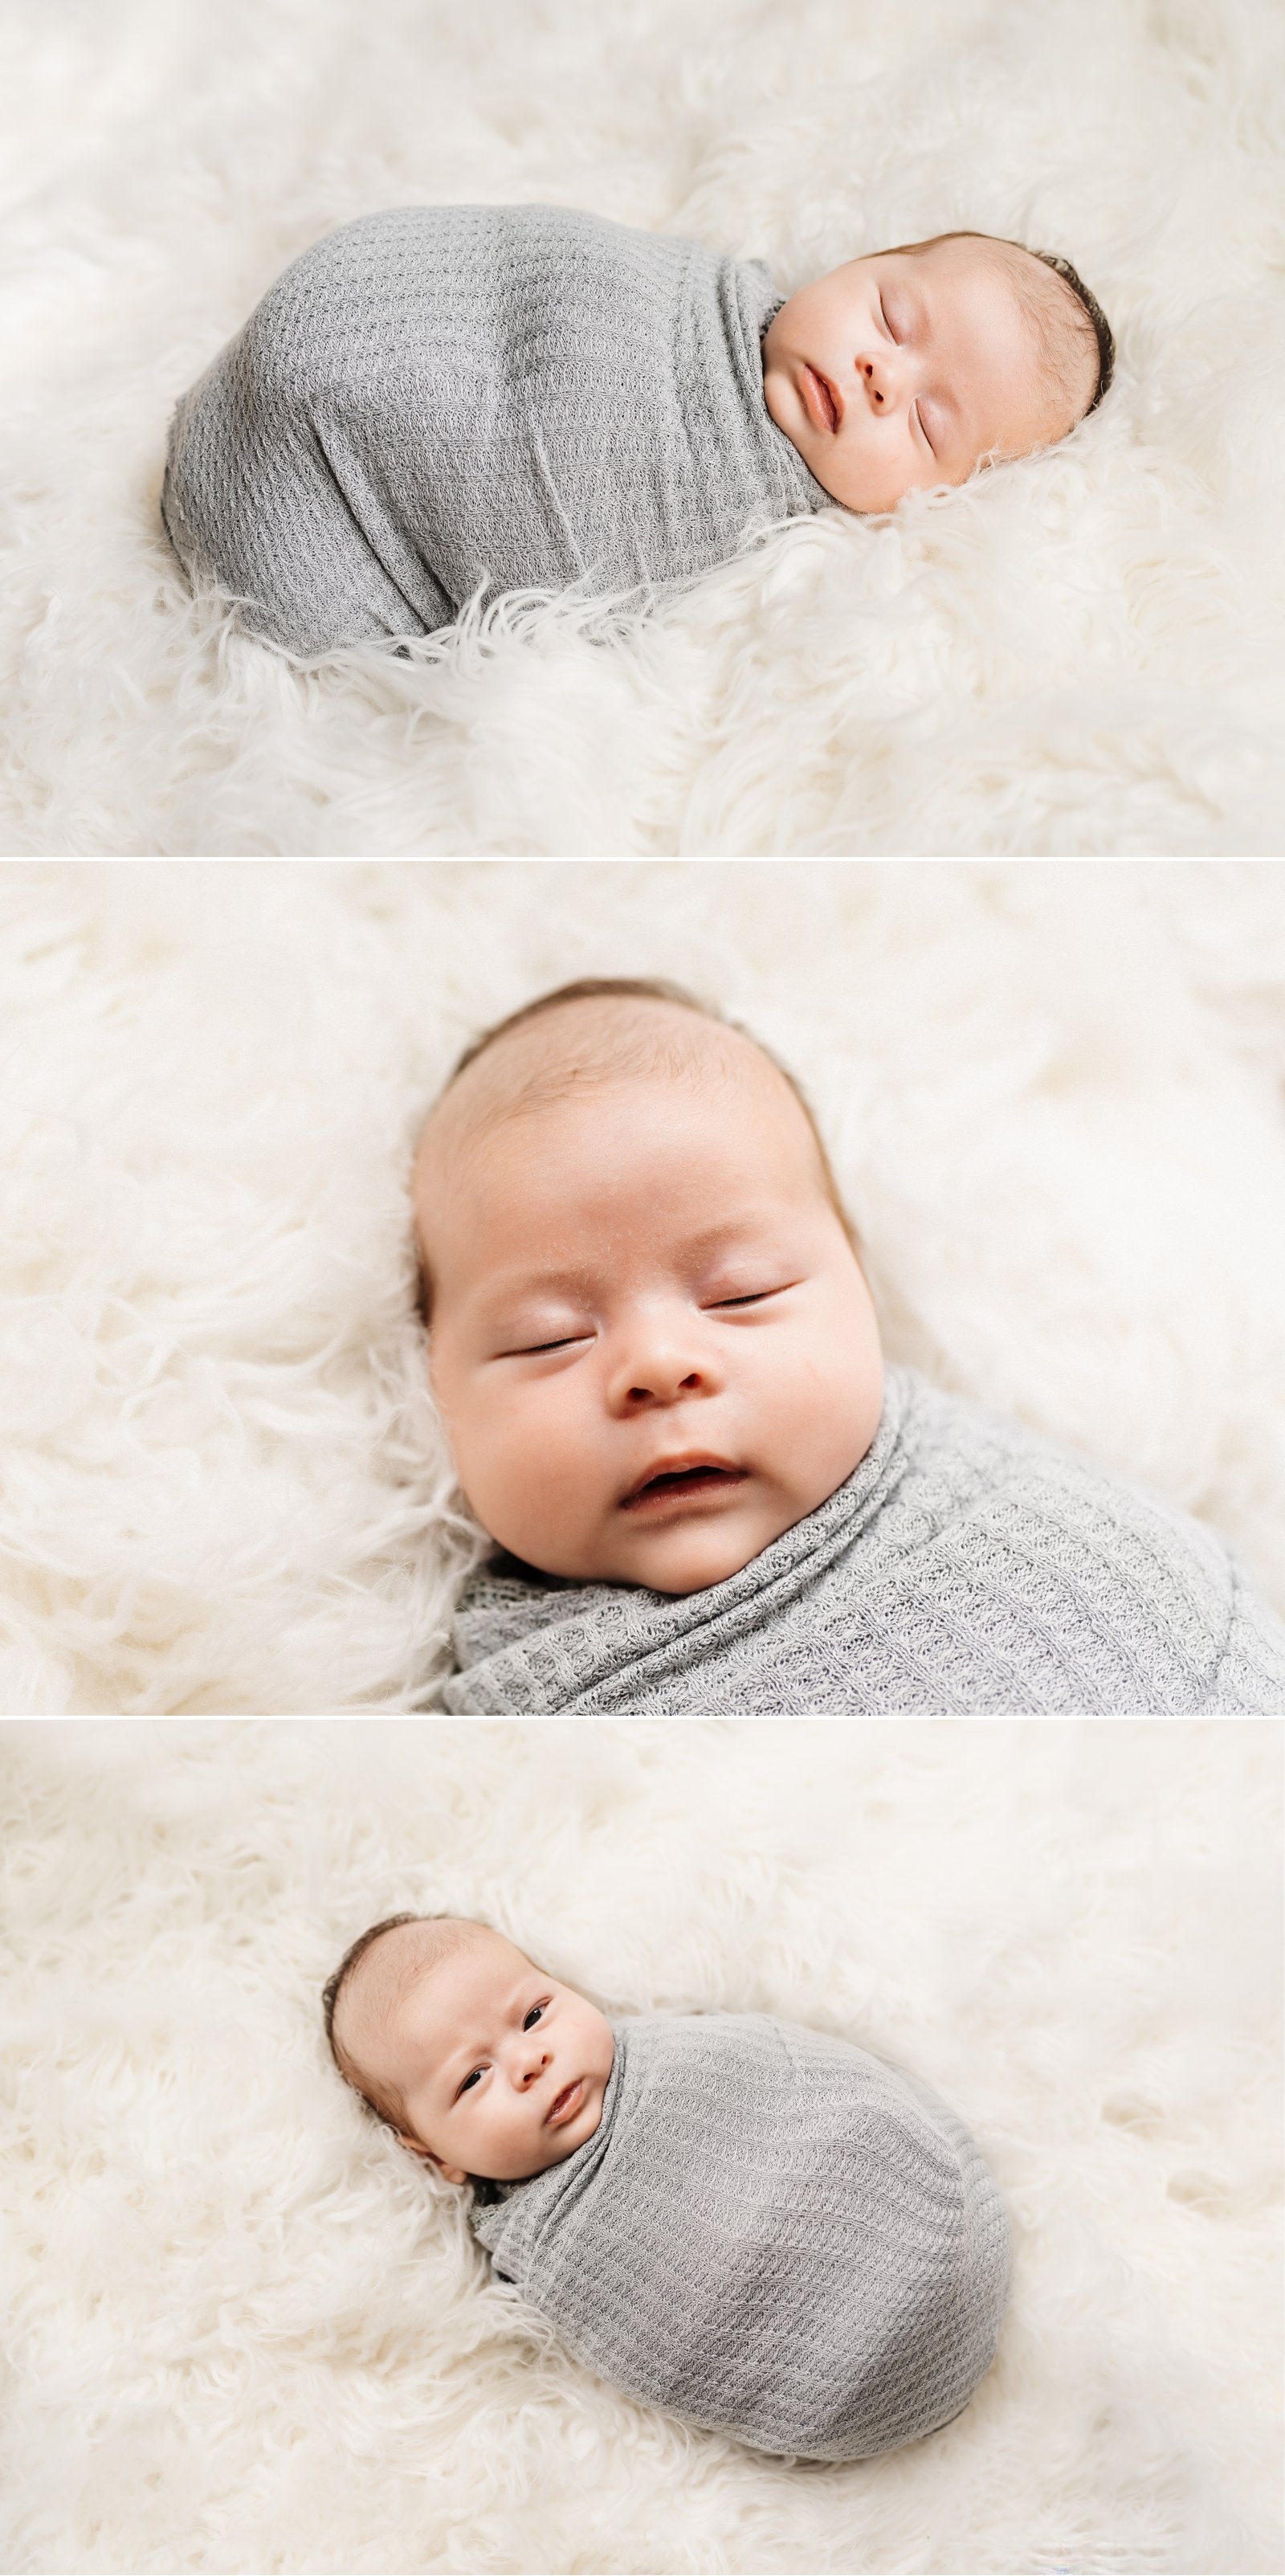 daly city at home newborn lifestyle photoshoot with sibling  19.jpg